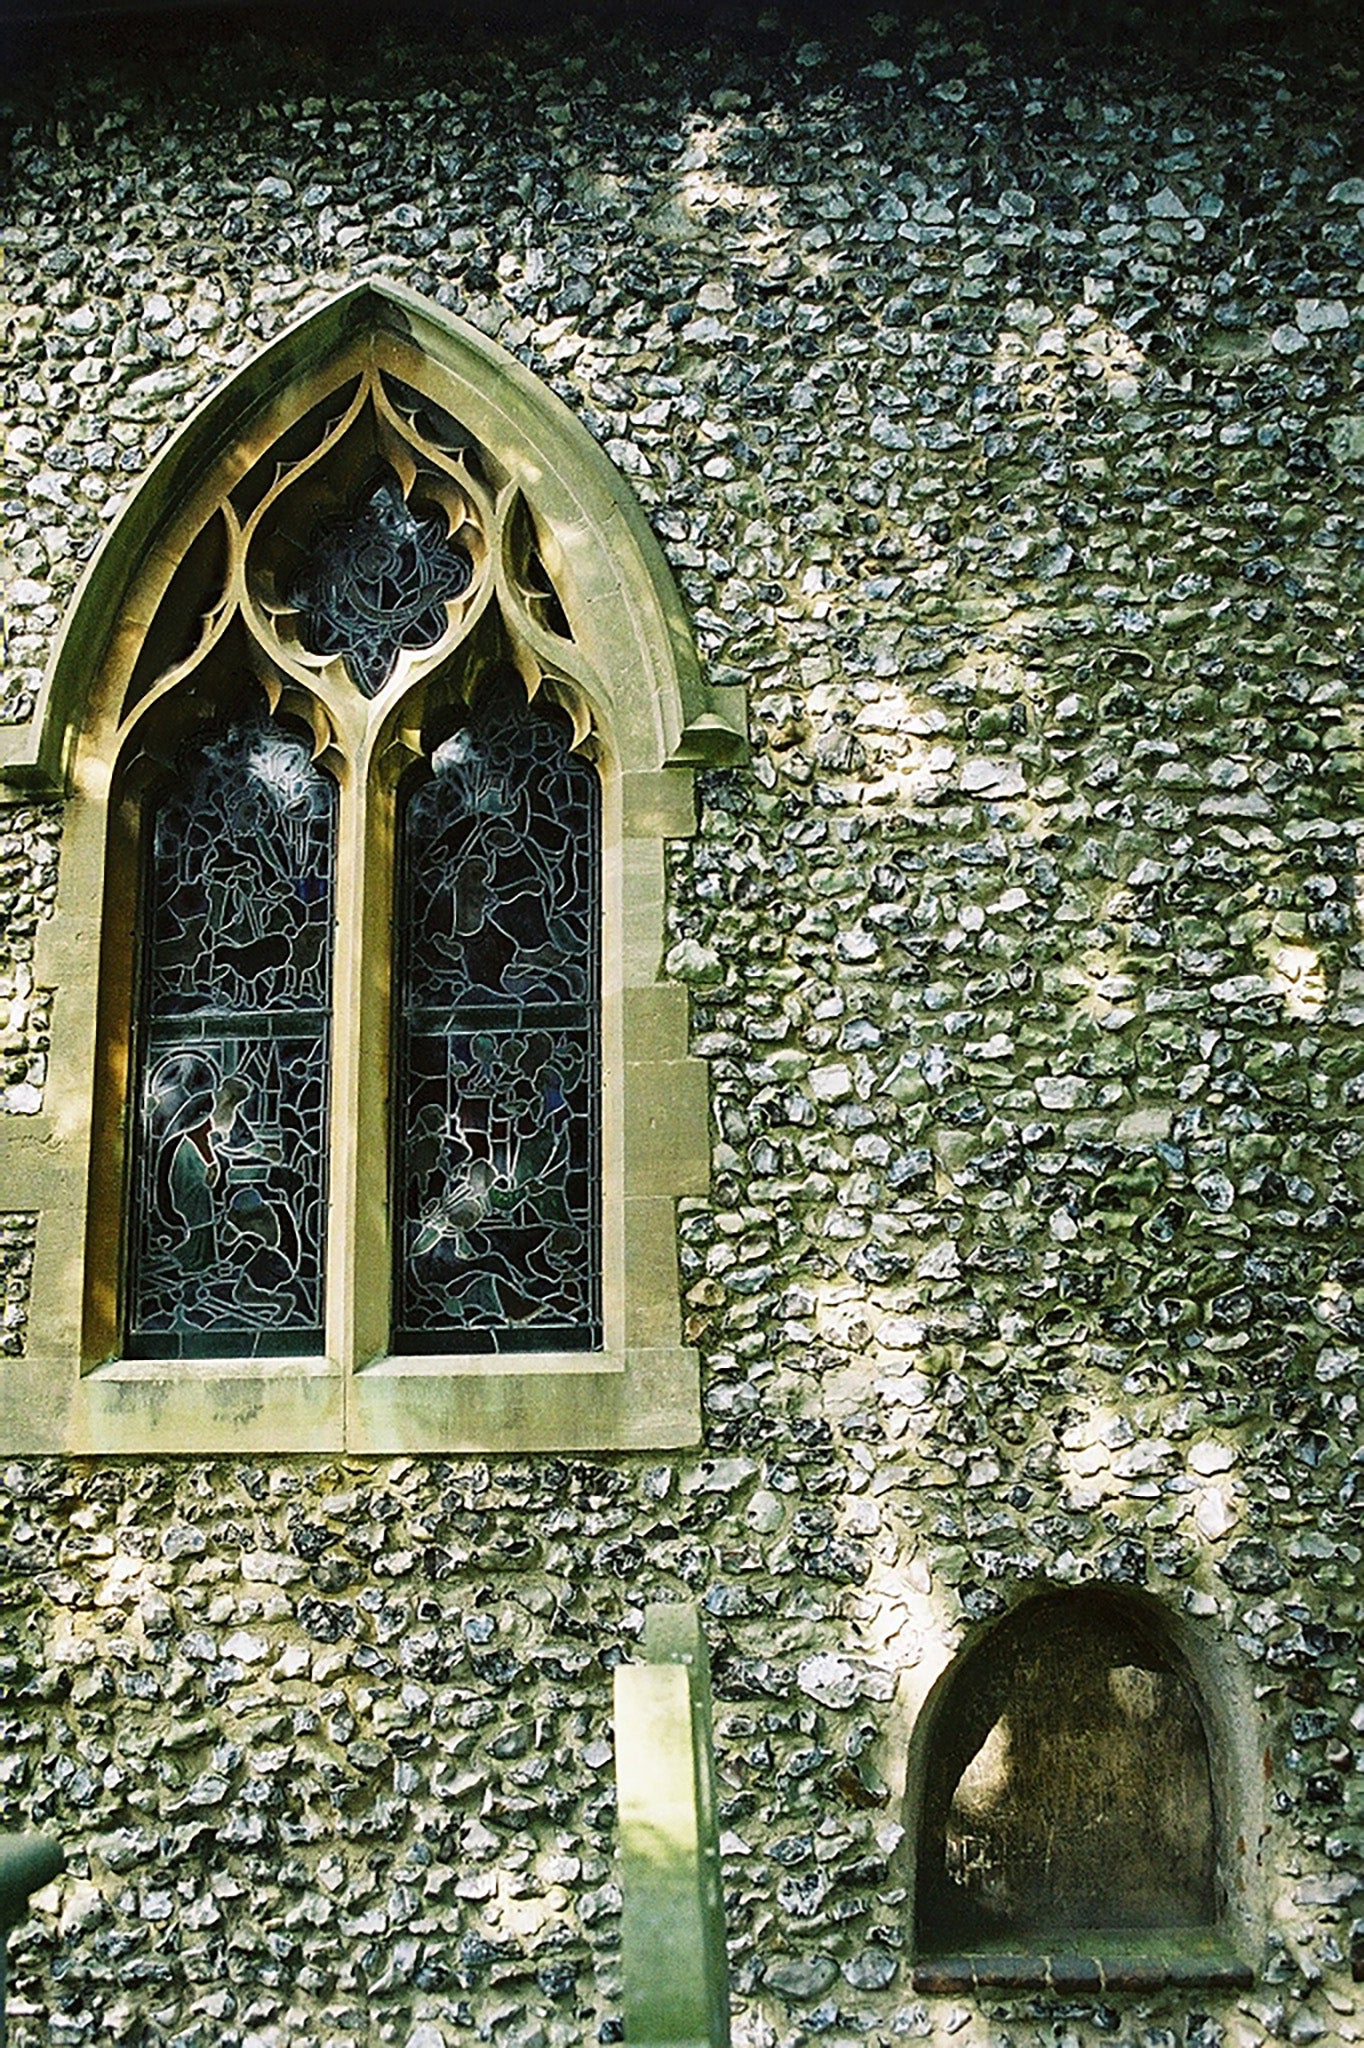 What’s thought to be the blocked opening of an anchorite cell at the Church of St Mary and St Nicholas in Leatherhead, Surrey